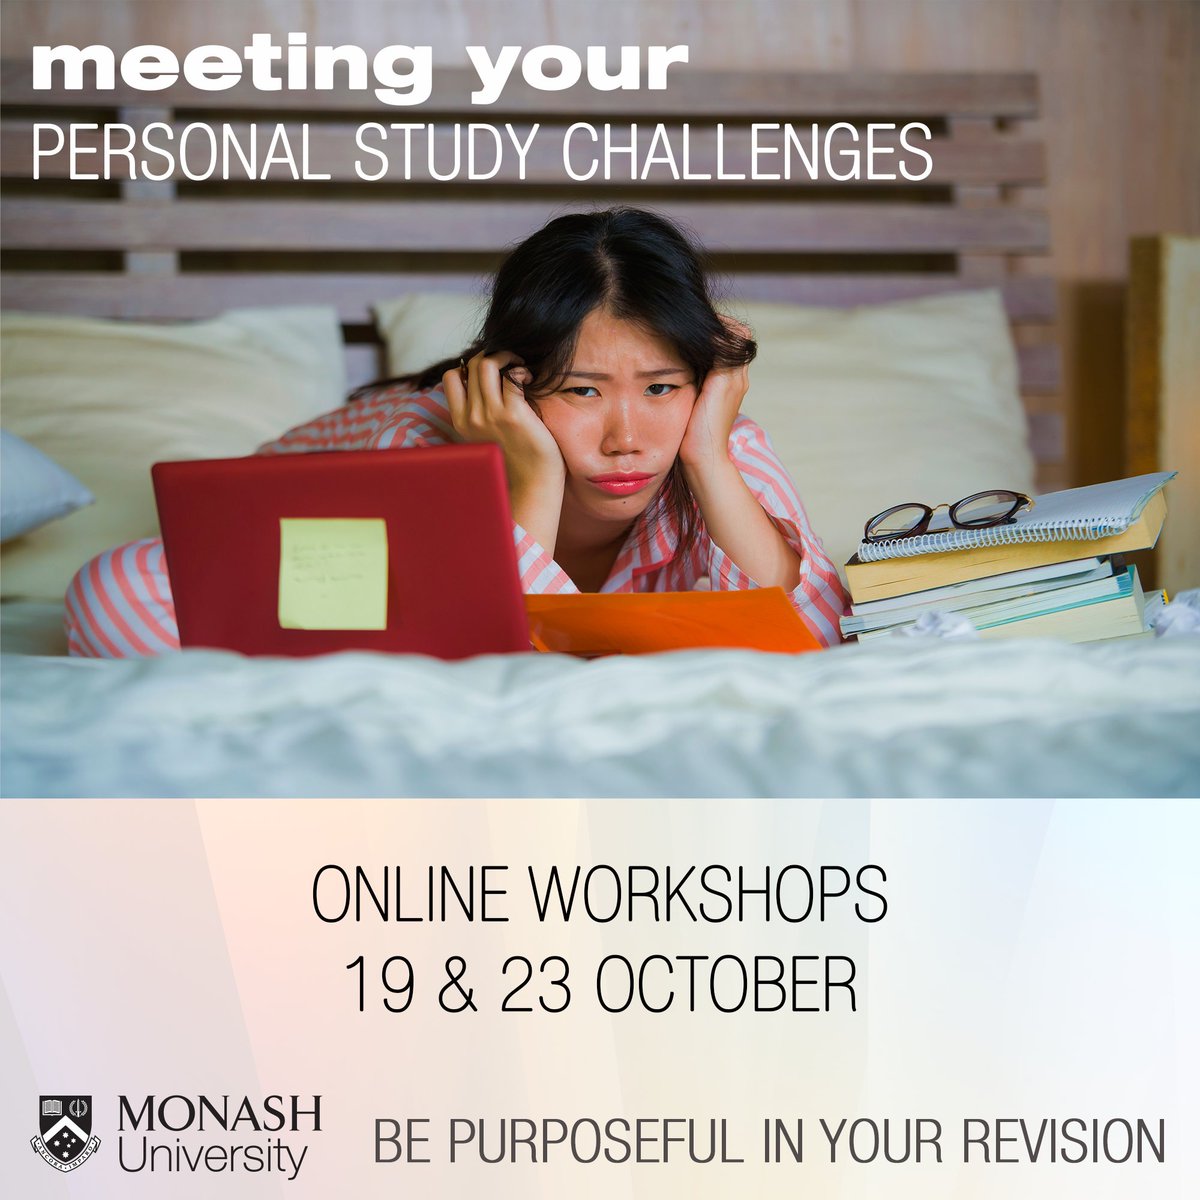 Feeling alone with your study struggle? Never fear, SAS is here!
Join this online workshop where we break down common study issues and work through the solutions!
#MonashStudentAcademicSuccess #UnleashYourPotential #StudyHacks #MonashUni #MonashExperience